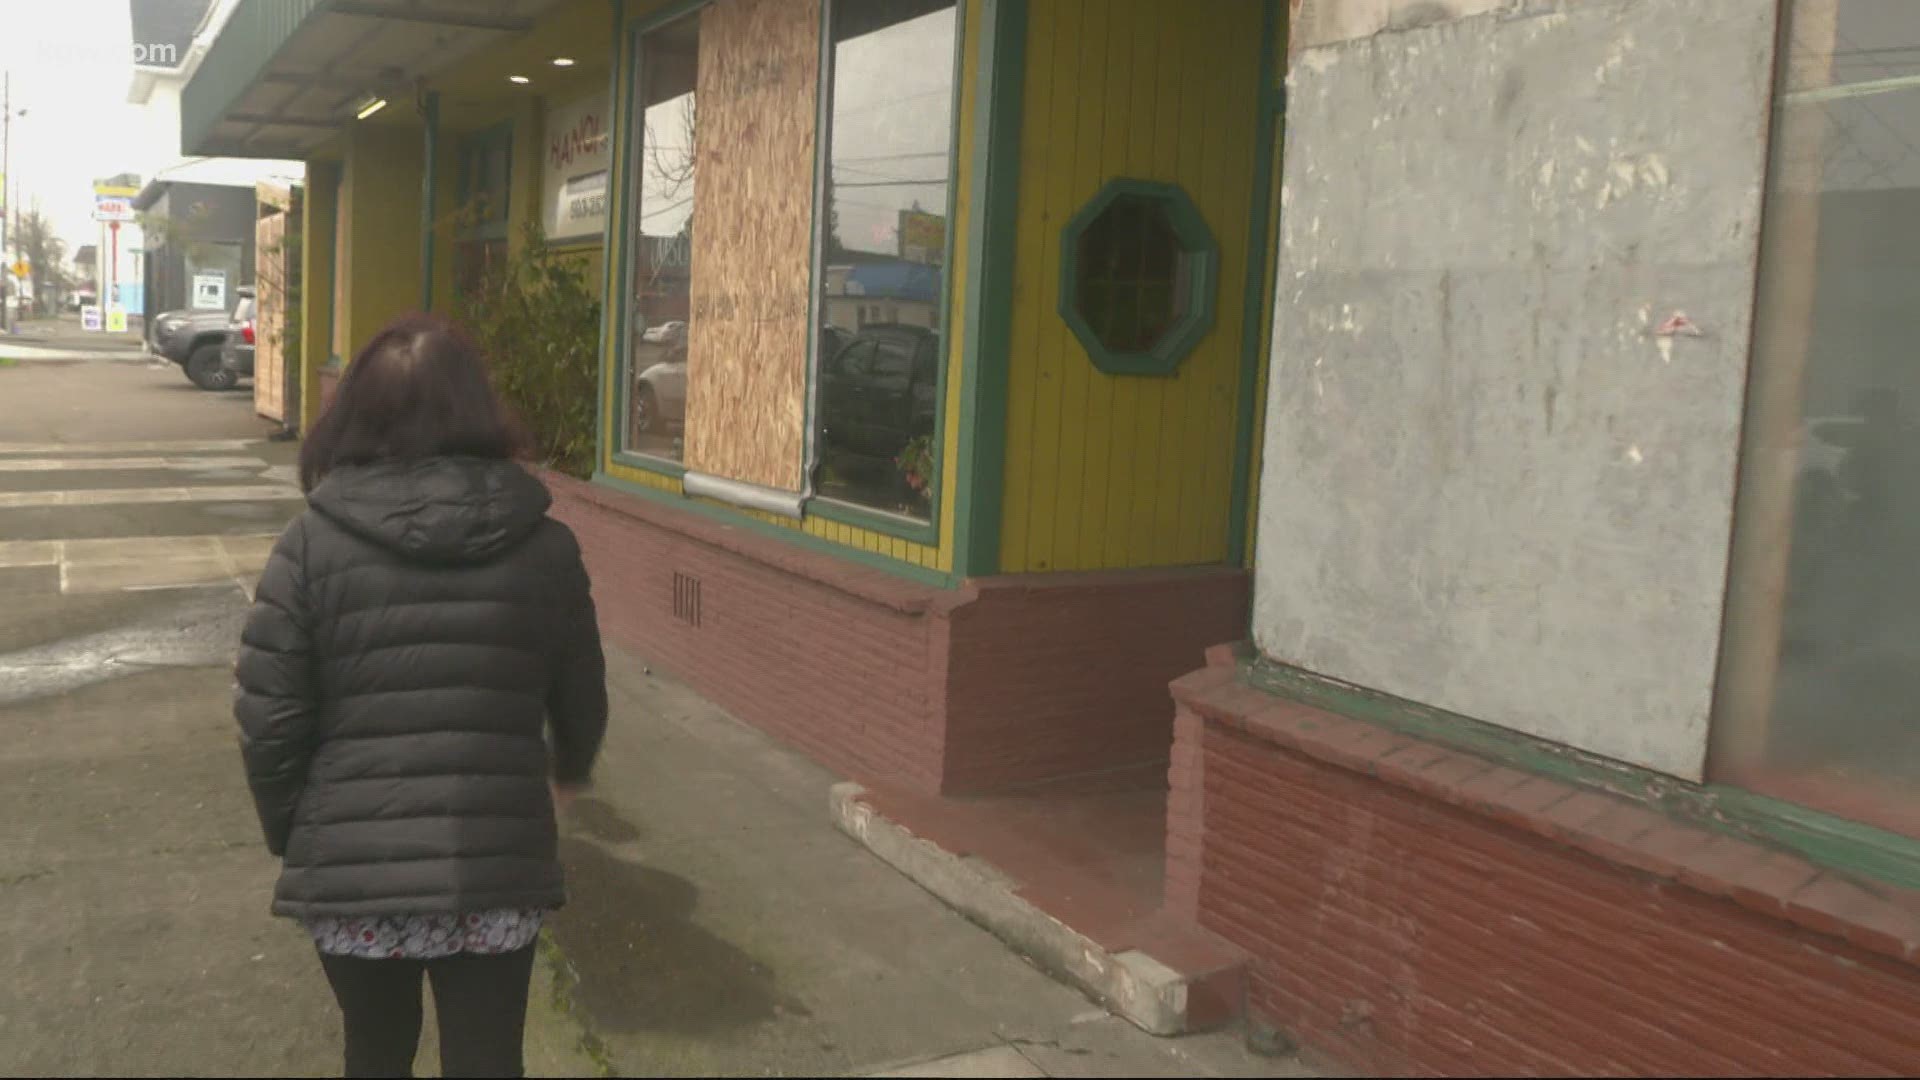 Several Asian-owned businesses in Portland think racism is behind recent vandalism. Morgan Romero reports.